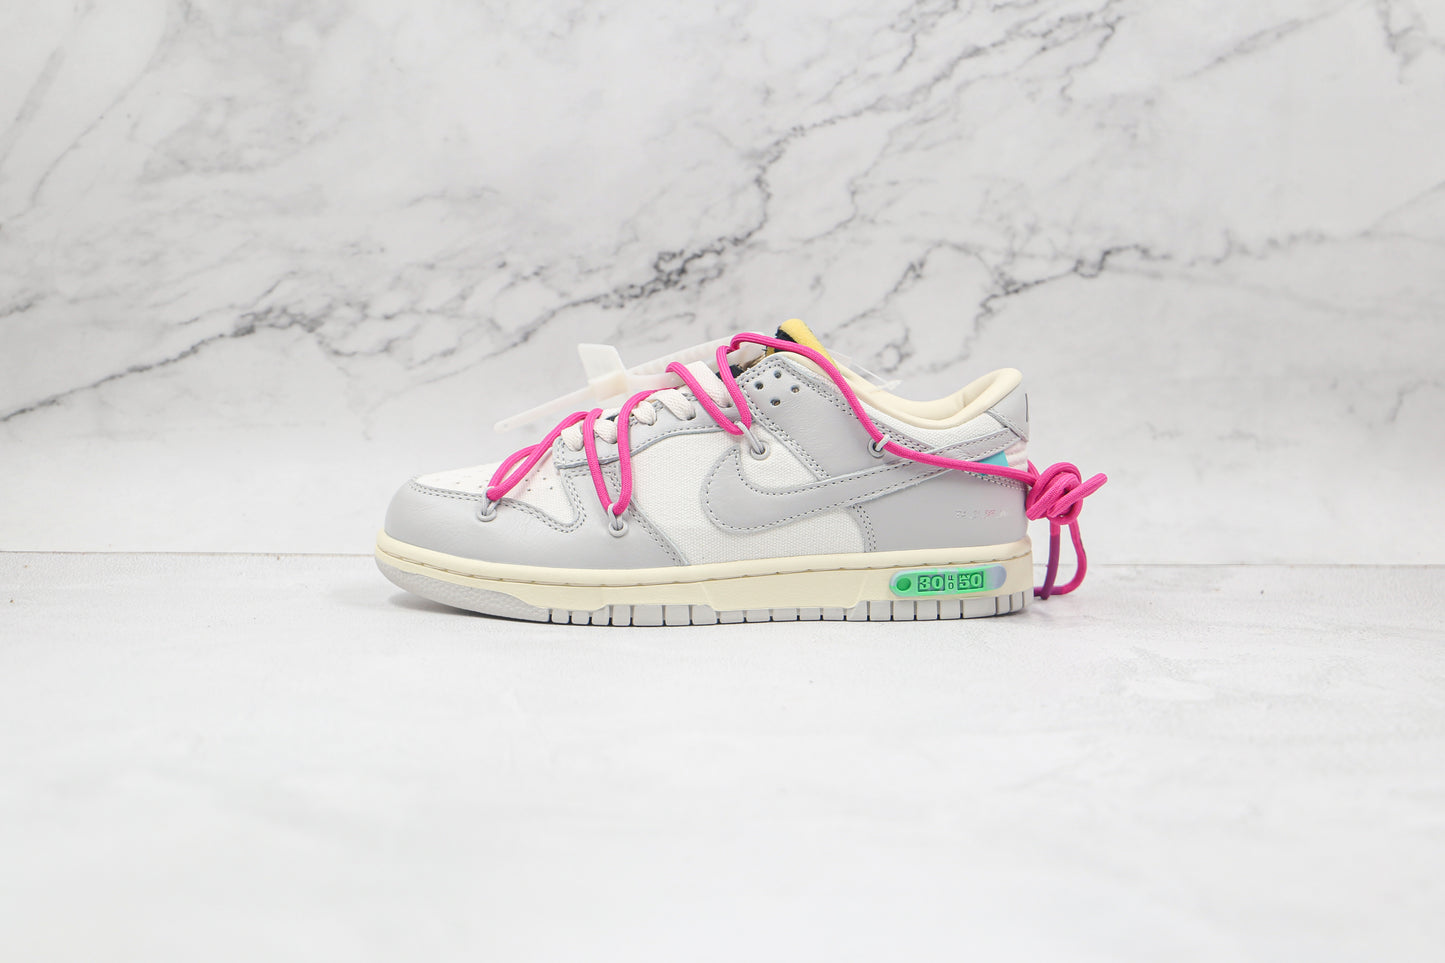 Nike Dunk Low Off White Lot 30:50